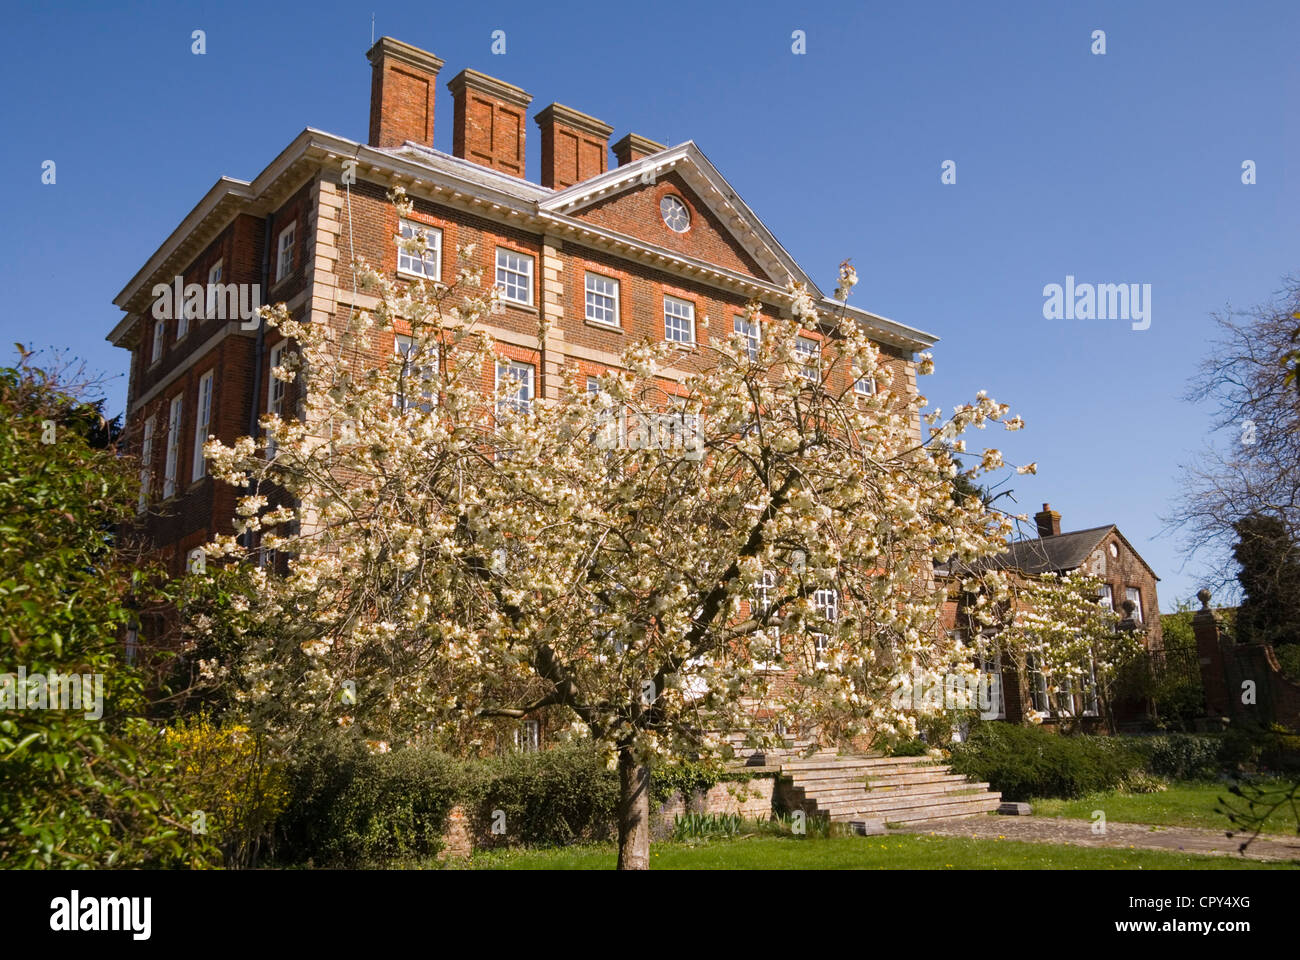 Bucks - Winslow Hall - circa 1700 -04 - built for William Lowndes - Secretary to the Treasury - design by Sir Christopher Wren Stock Photo